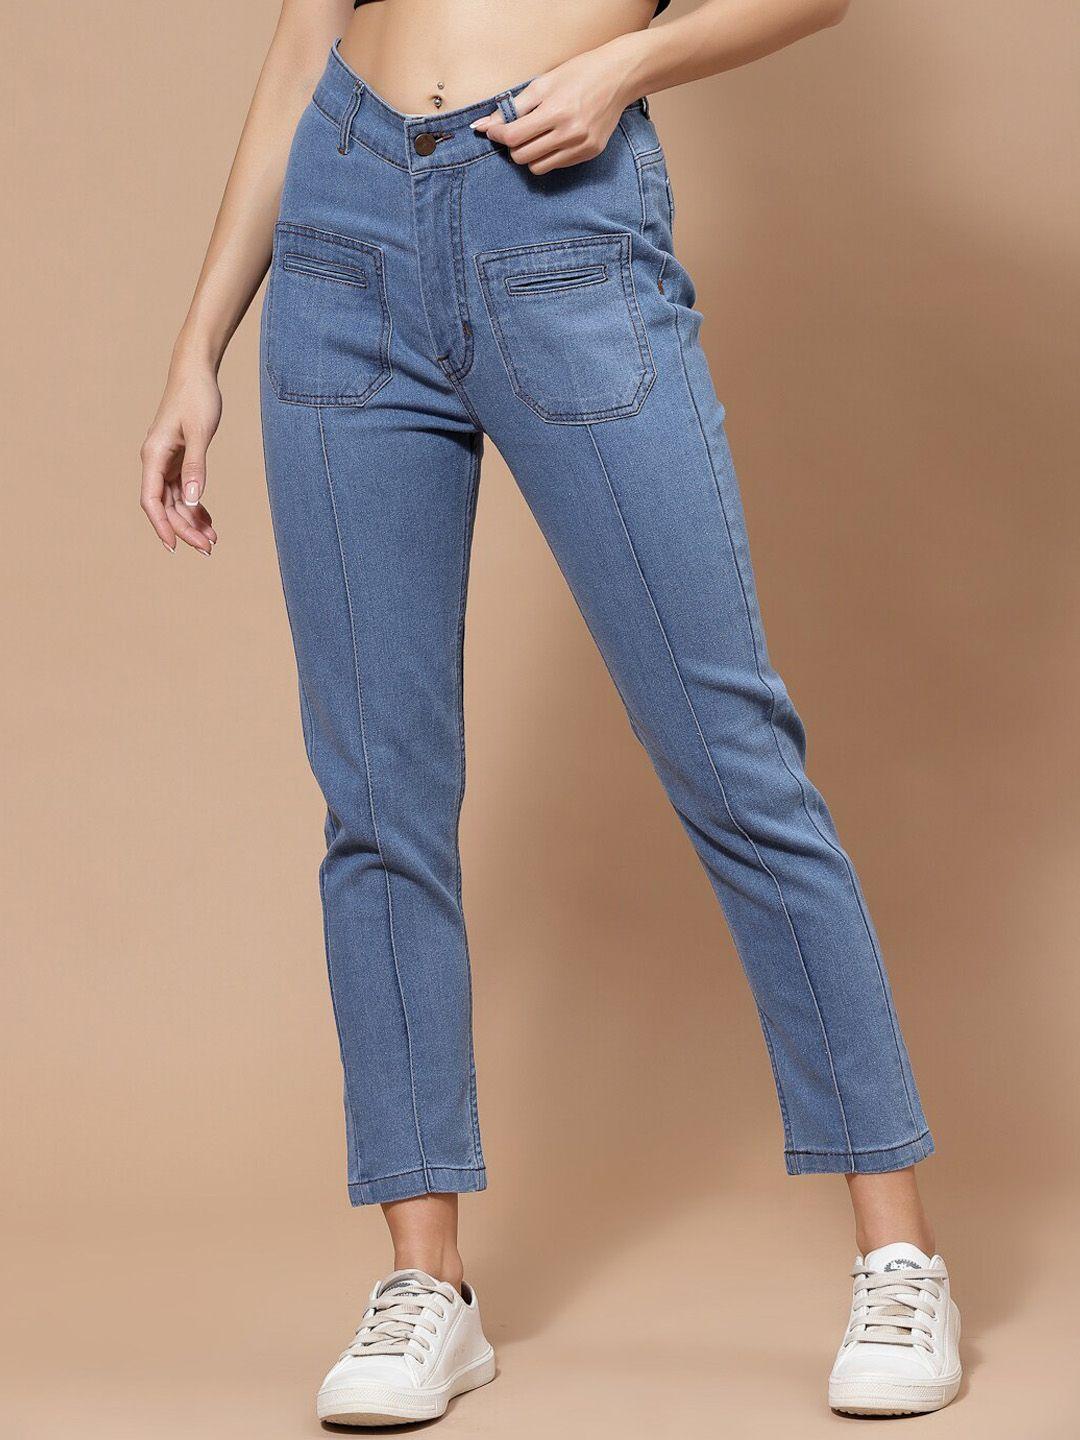 kassually women blue stretchable jeans